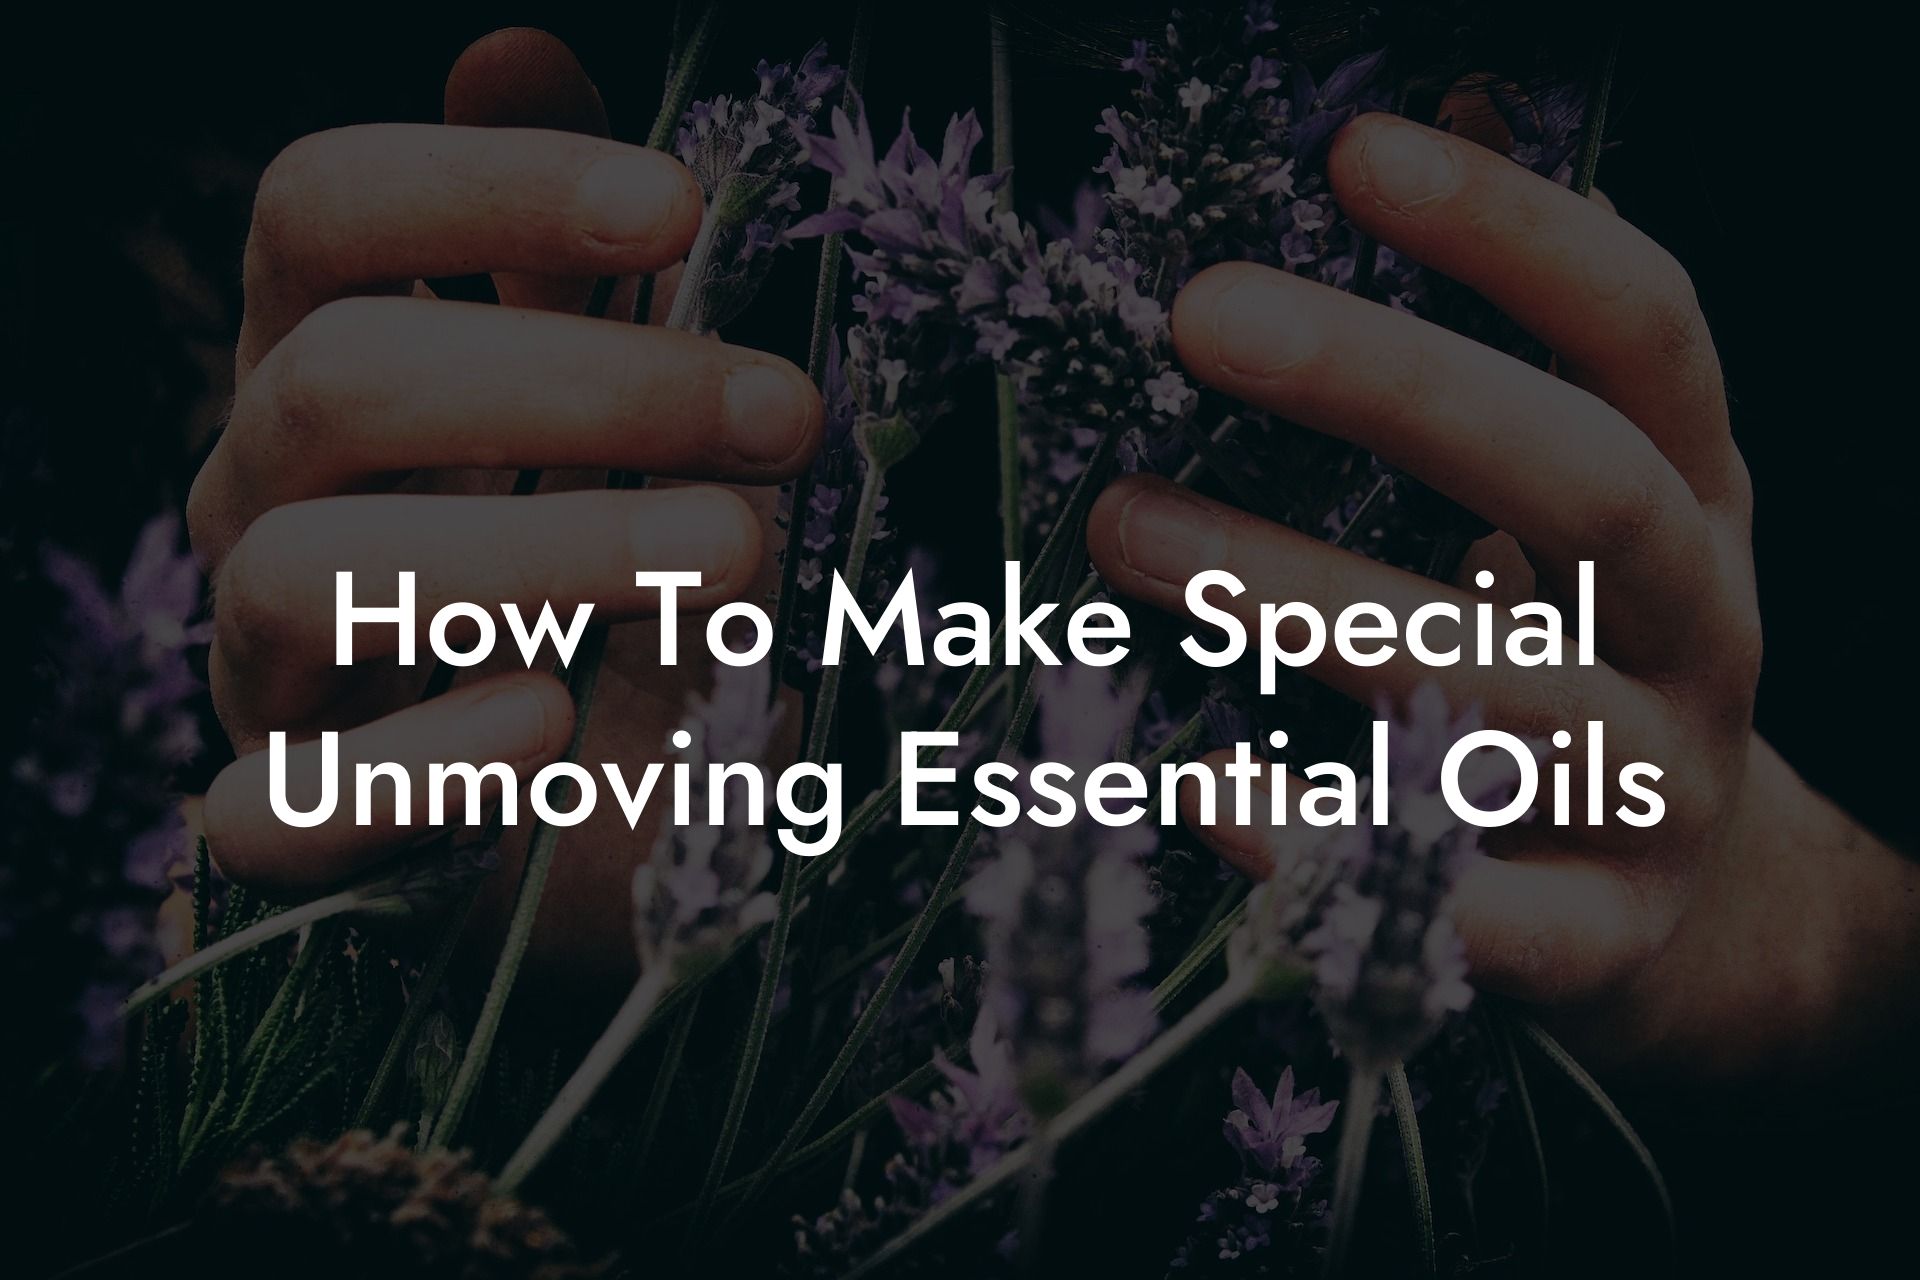 How To Make Special Unmoving Essential Oils